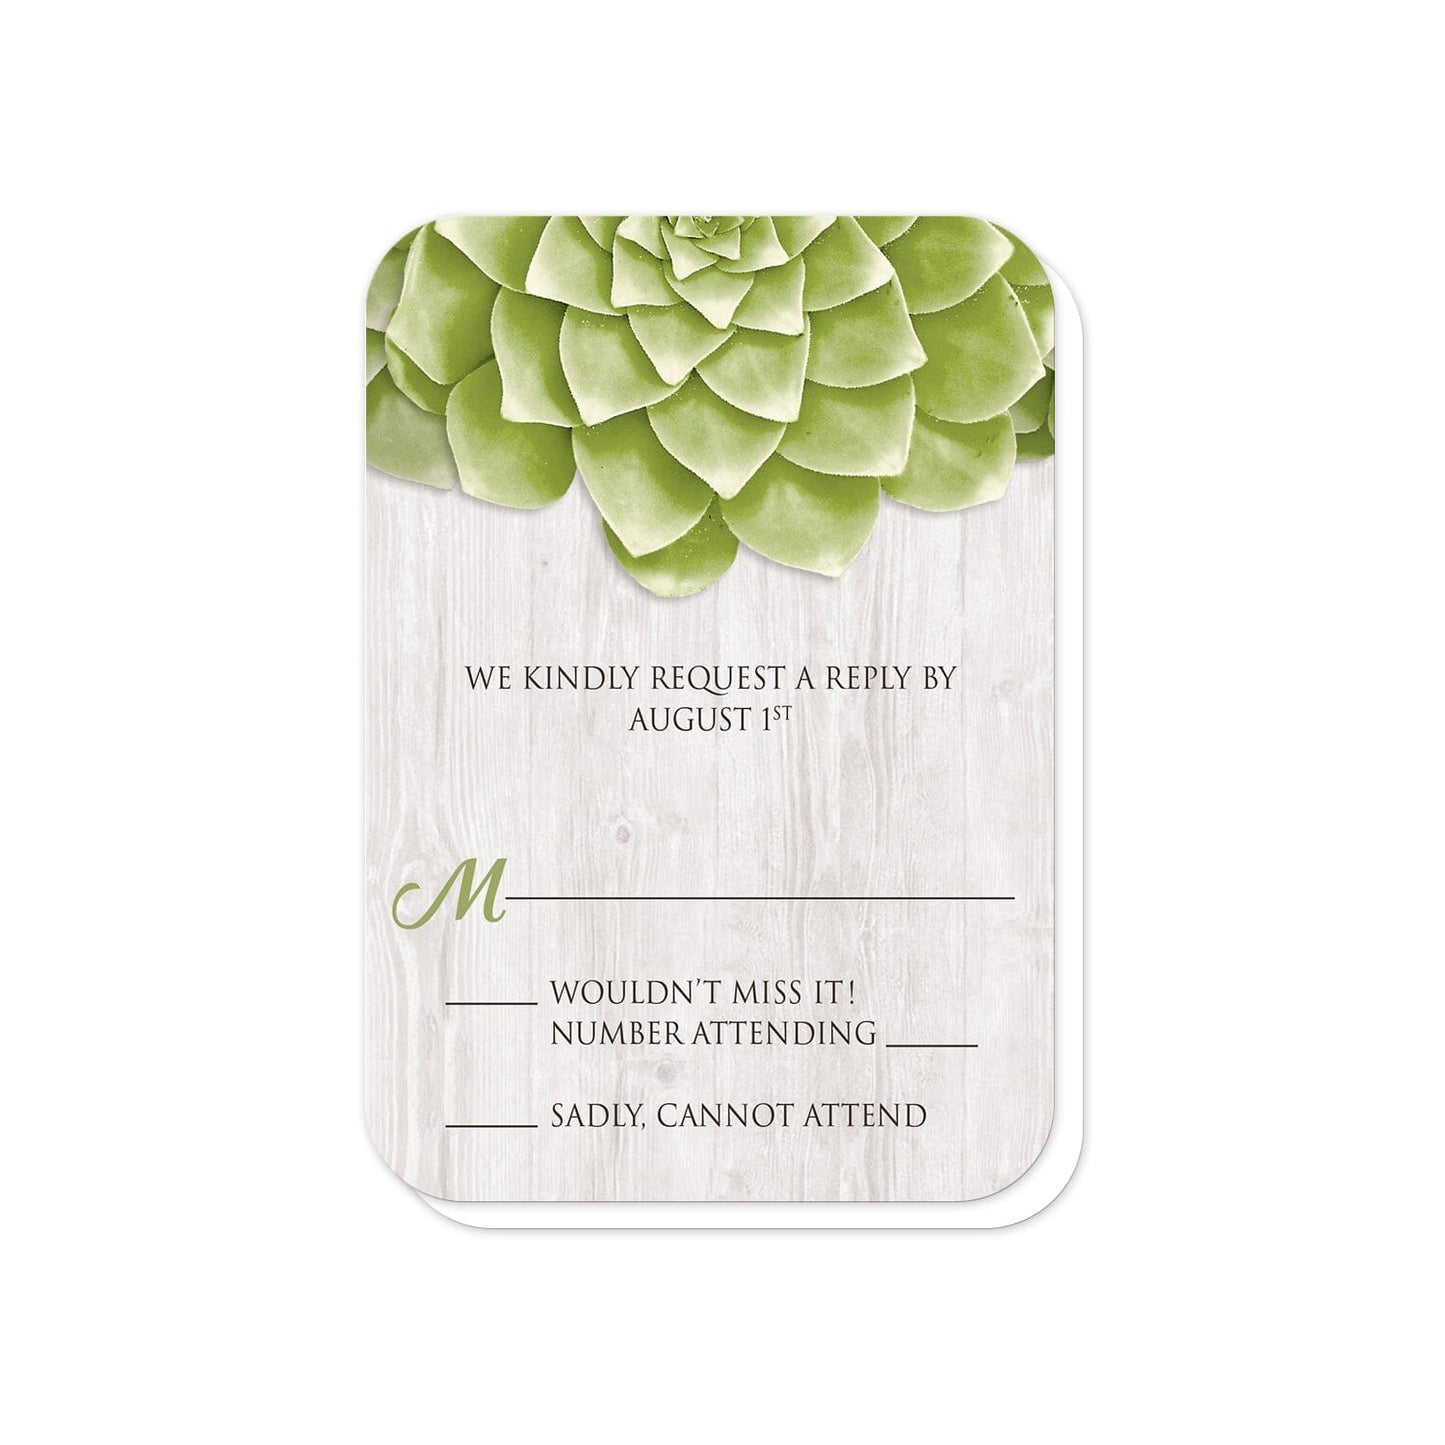 Succulent Whitewashed Wood RSVP Cards (with rounded corners) at Artistically Invited.